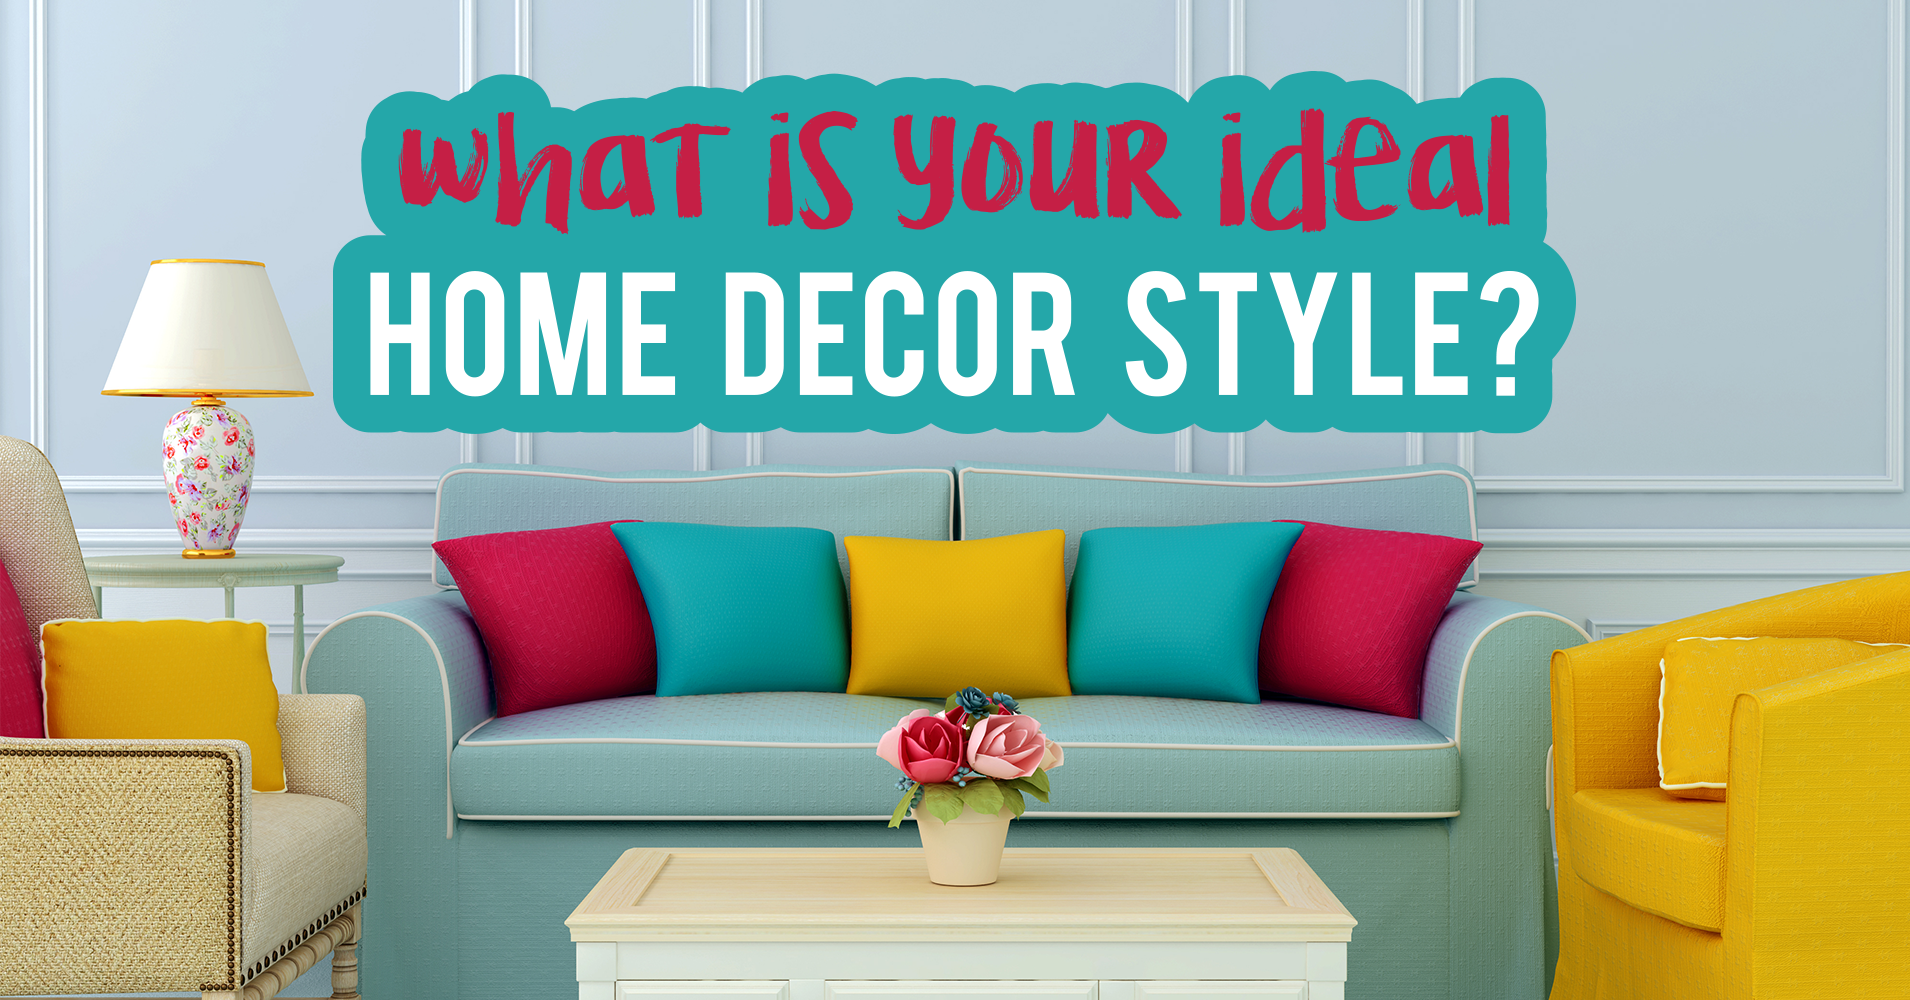 What Is Your Ideal HomeDecor Style? Quiz